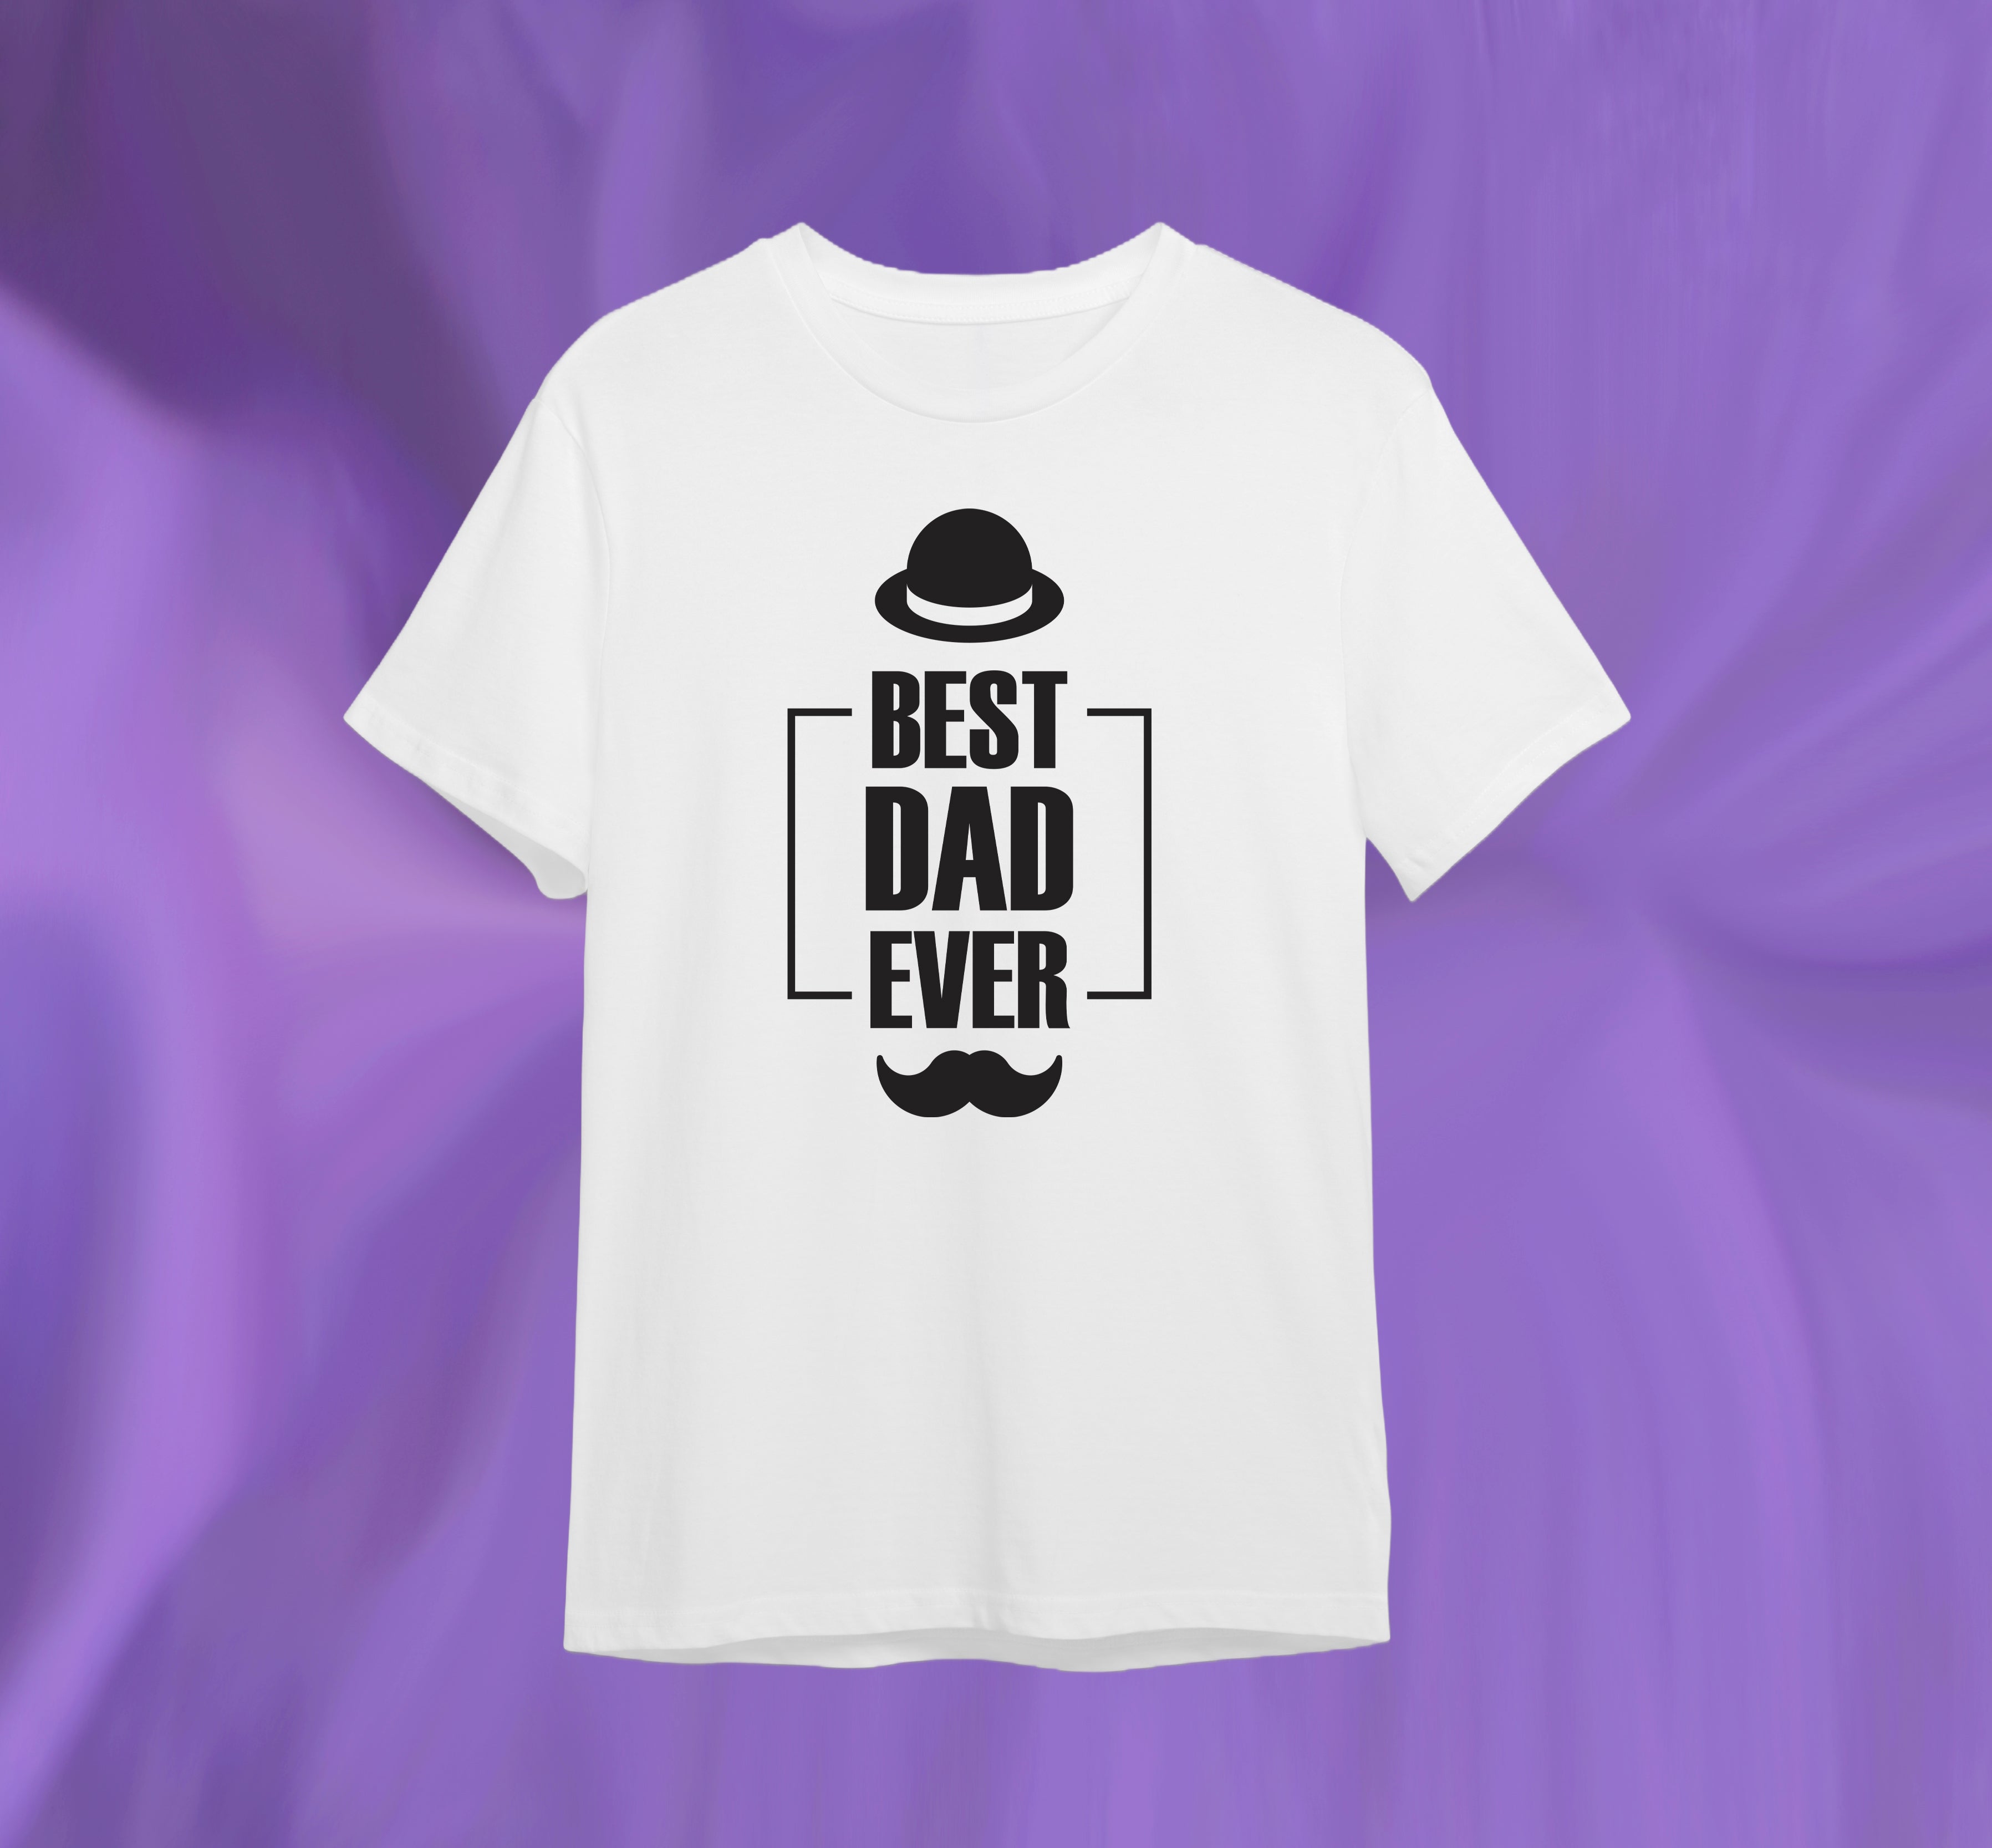 T-shirts for Fathers Day